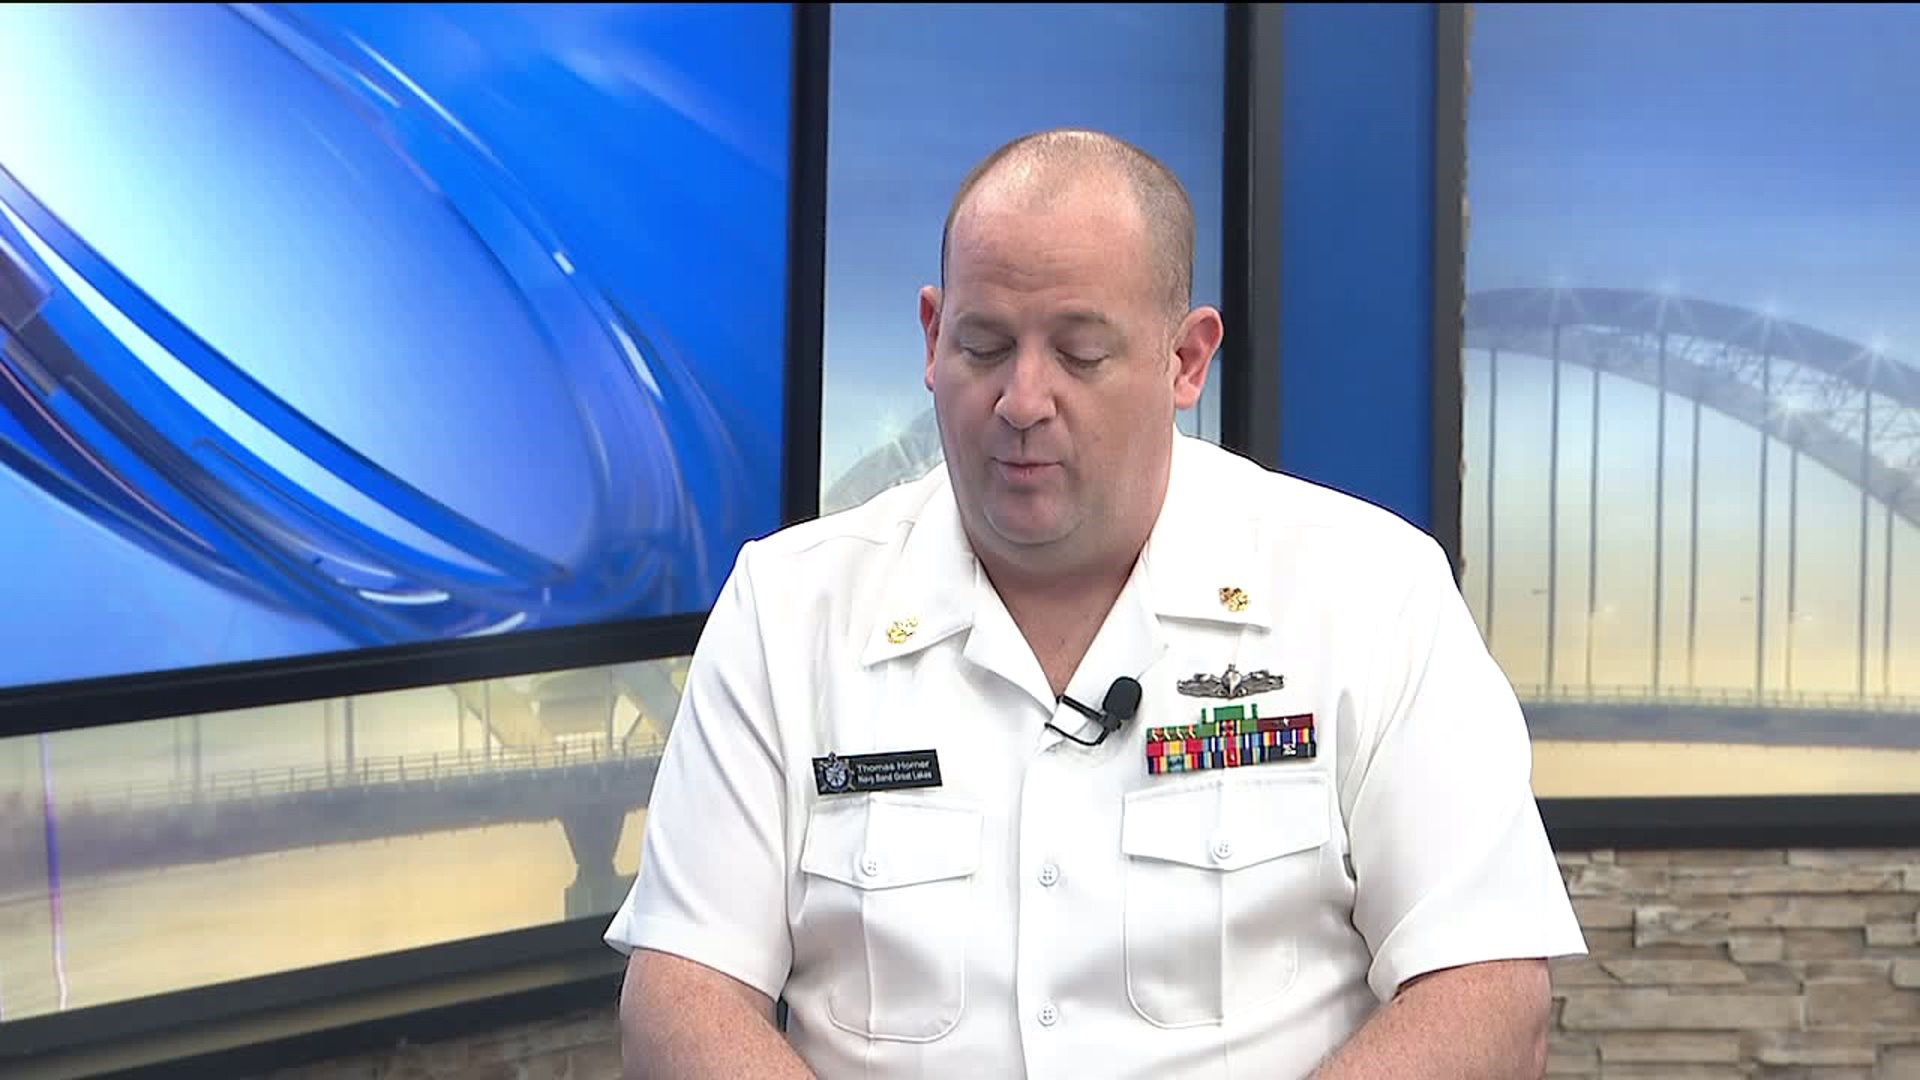 WHAT`S HAPPENING? Quad City leaders celebrate United States Navy